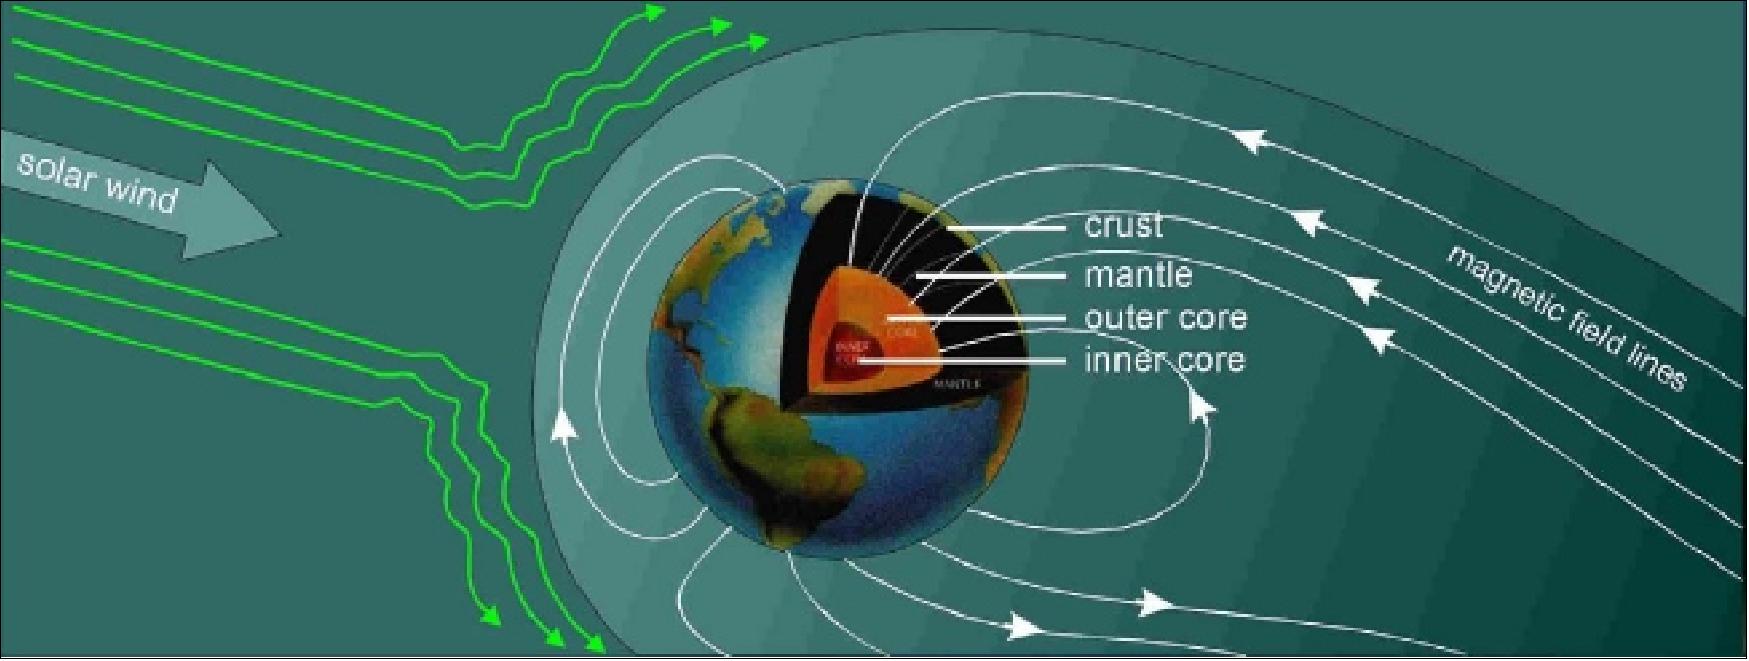 Figure 2: Artist's view of solar wind interacting with Earth's magnetic field (image credit: DTU Space)